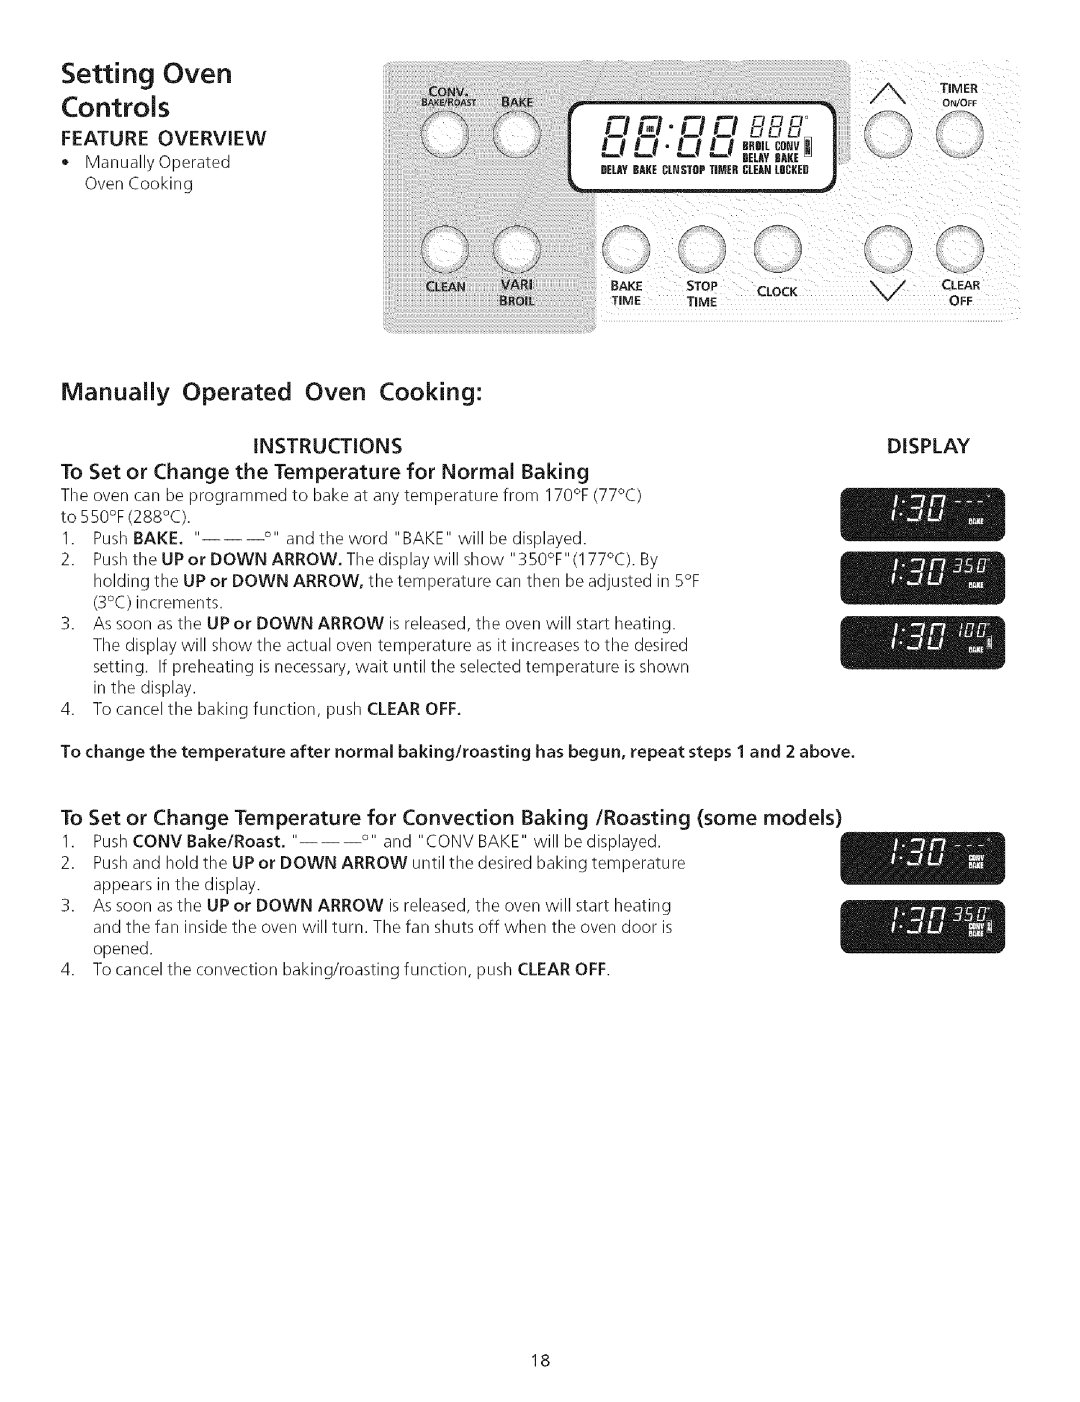 Kenmore 790.75503 manual Controls, Setting Oven, Feature Overview, Display 